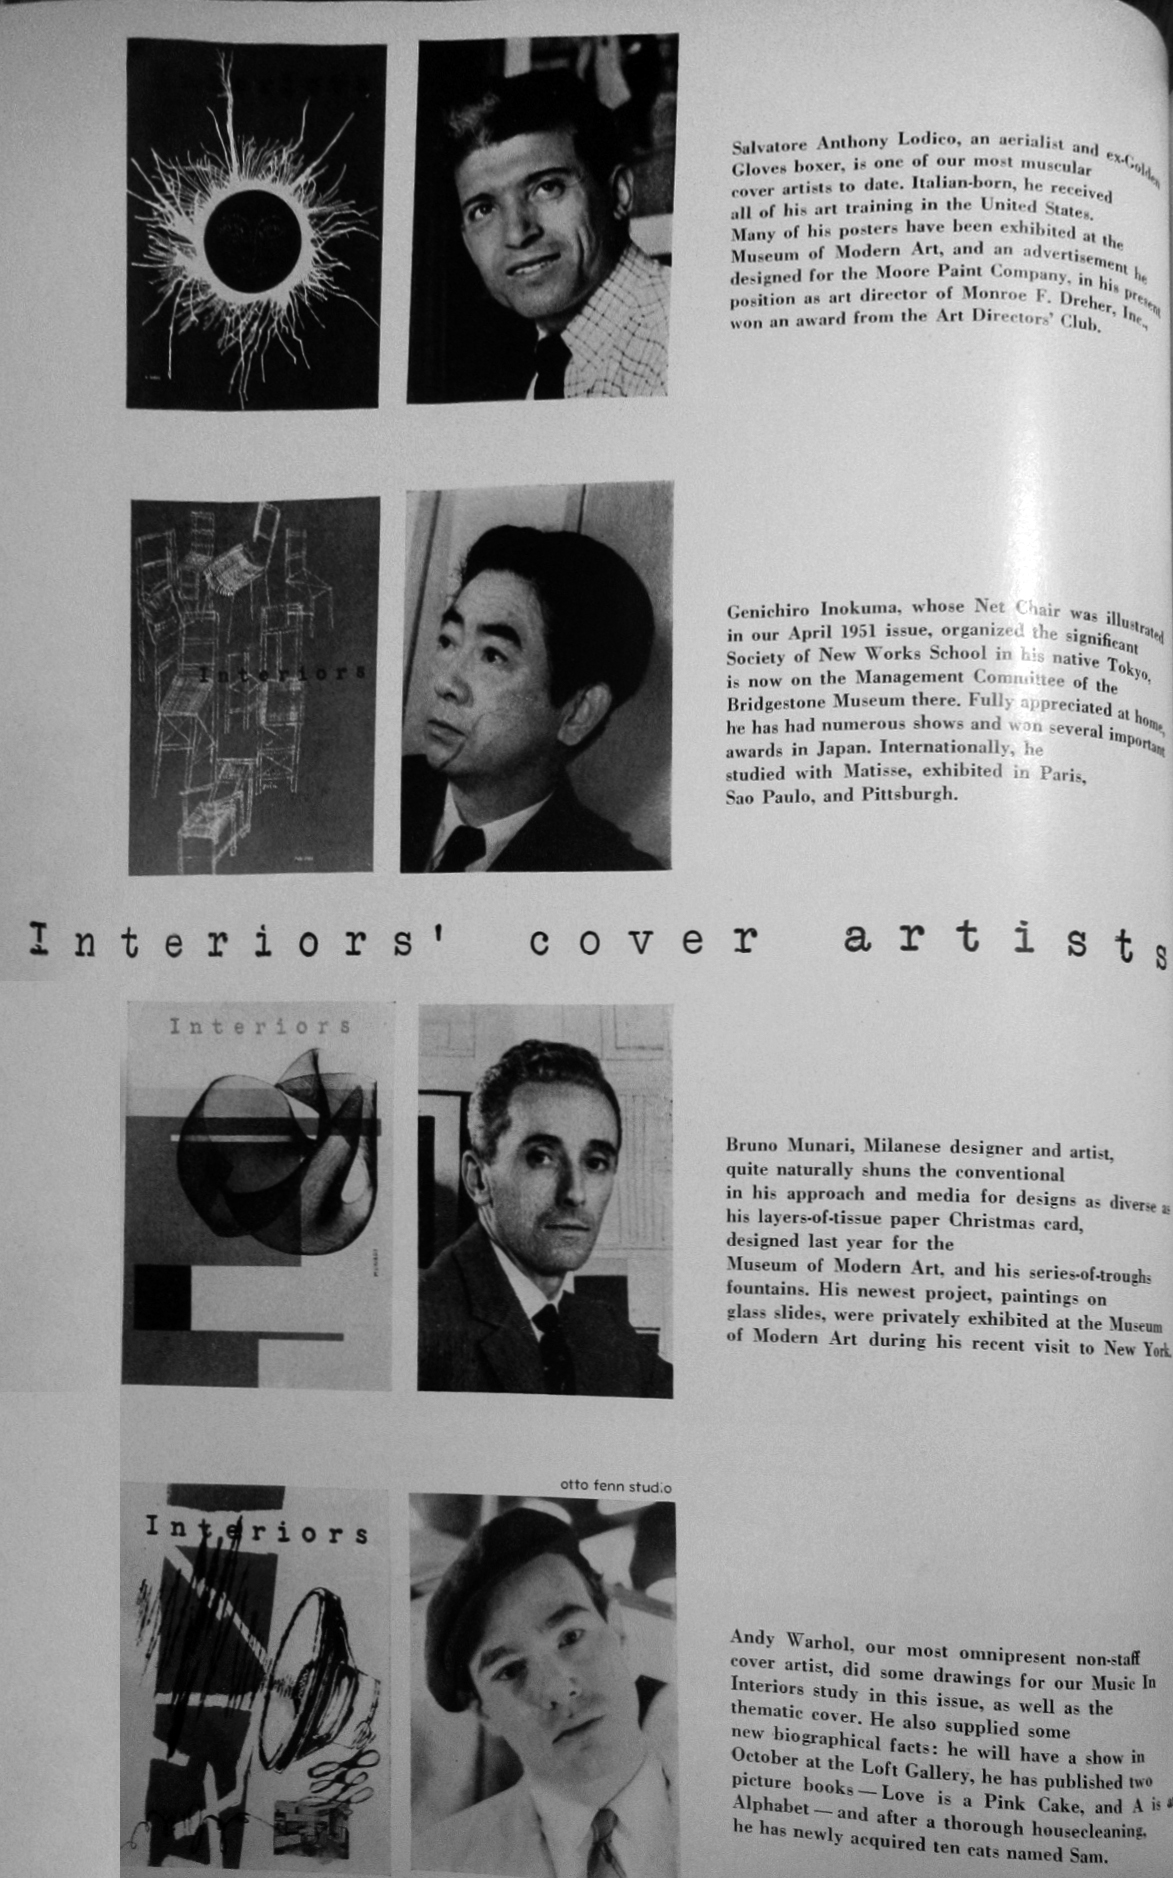 "Interiors' cover artists"